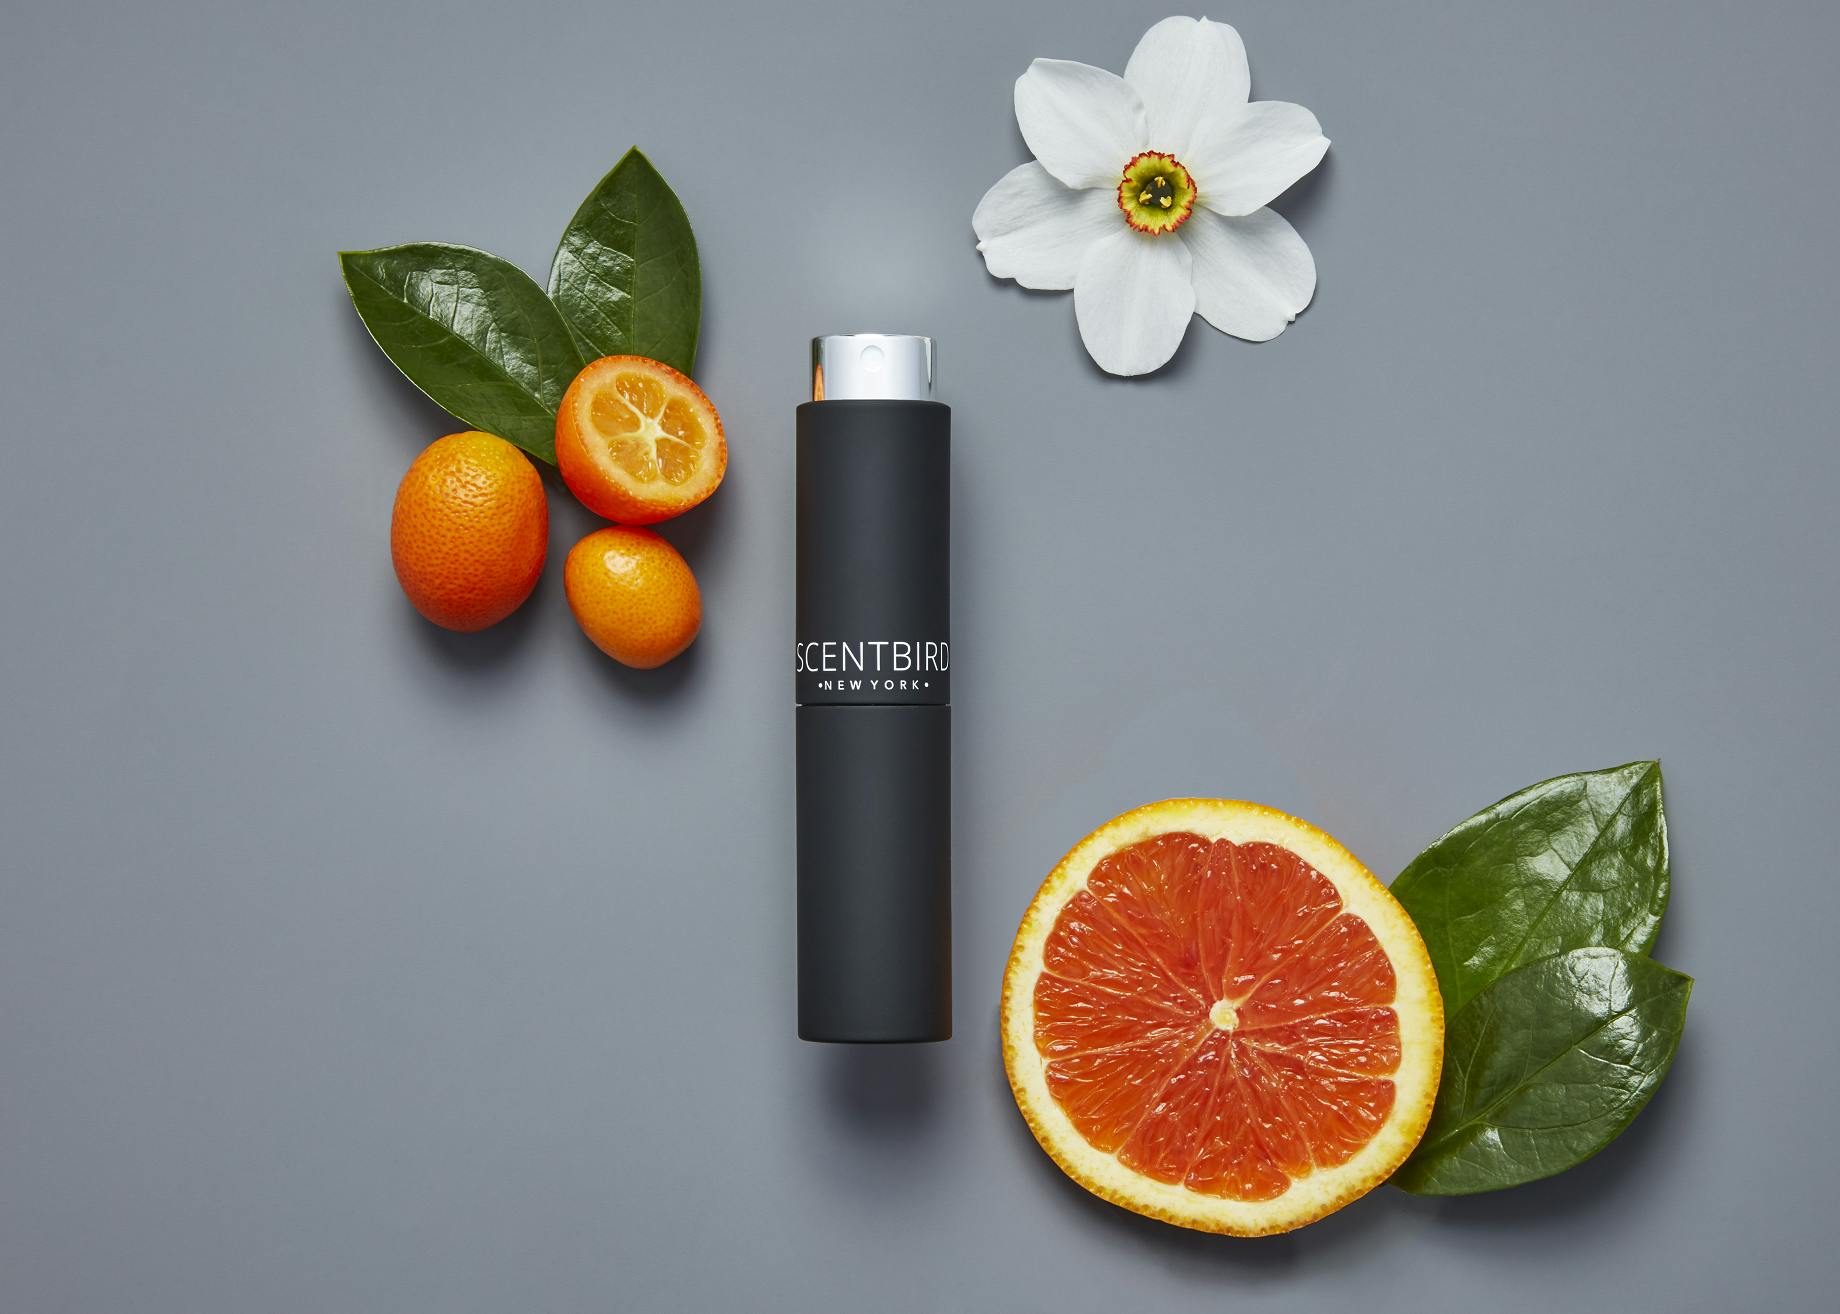 thoughtful mothers day gifts scentbird